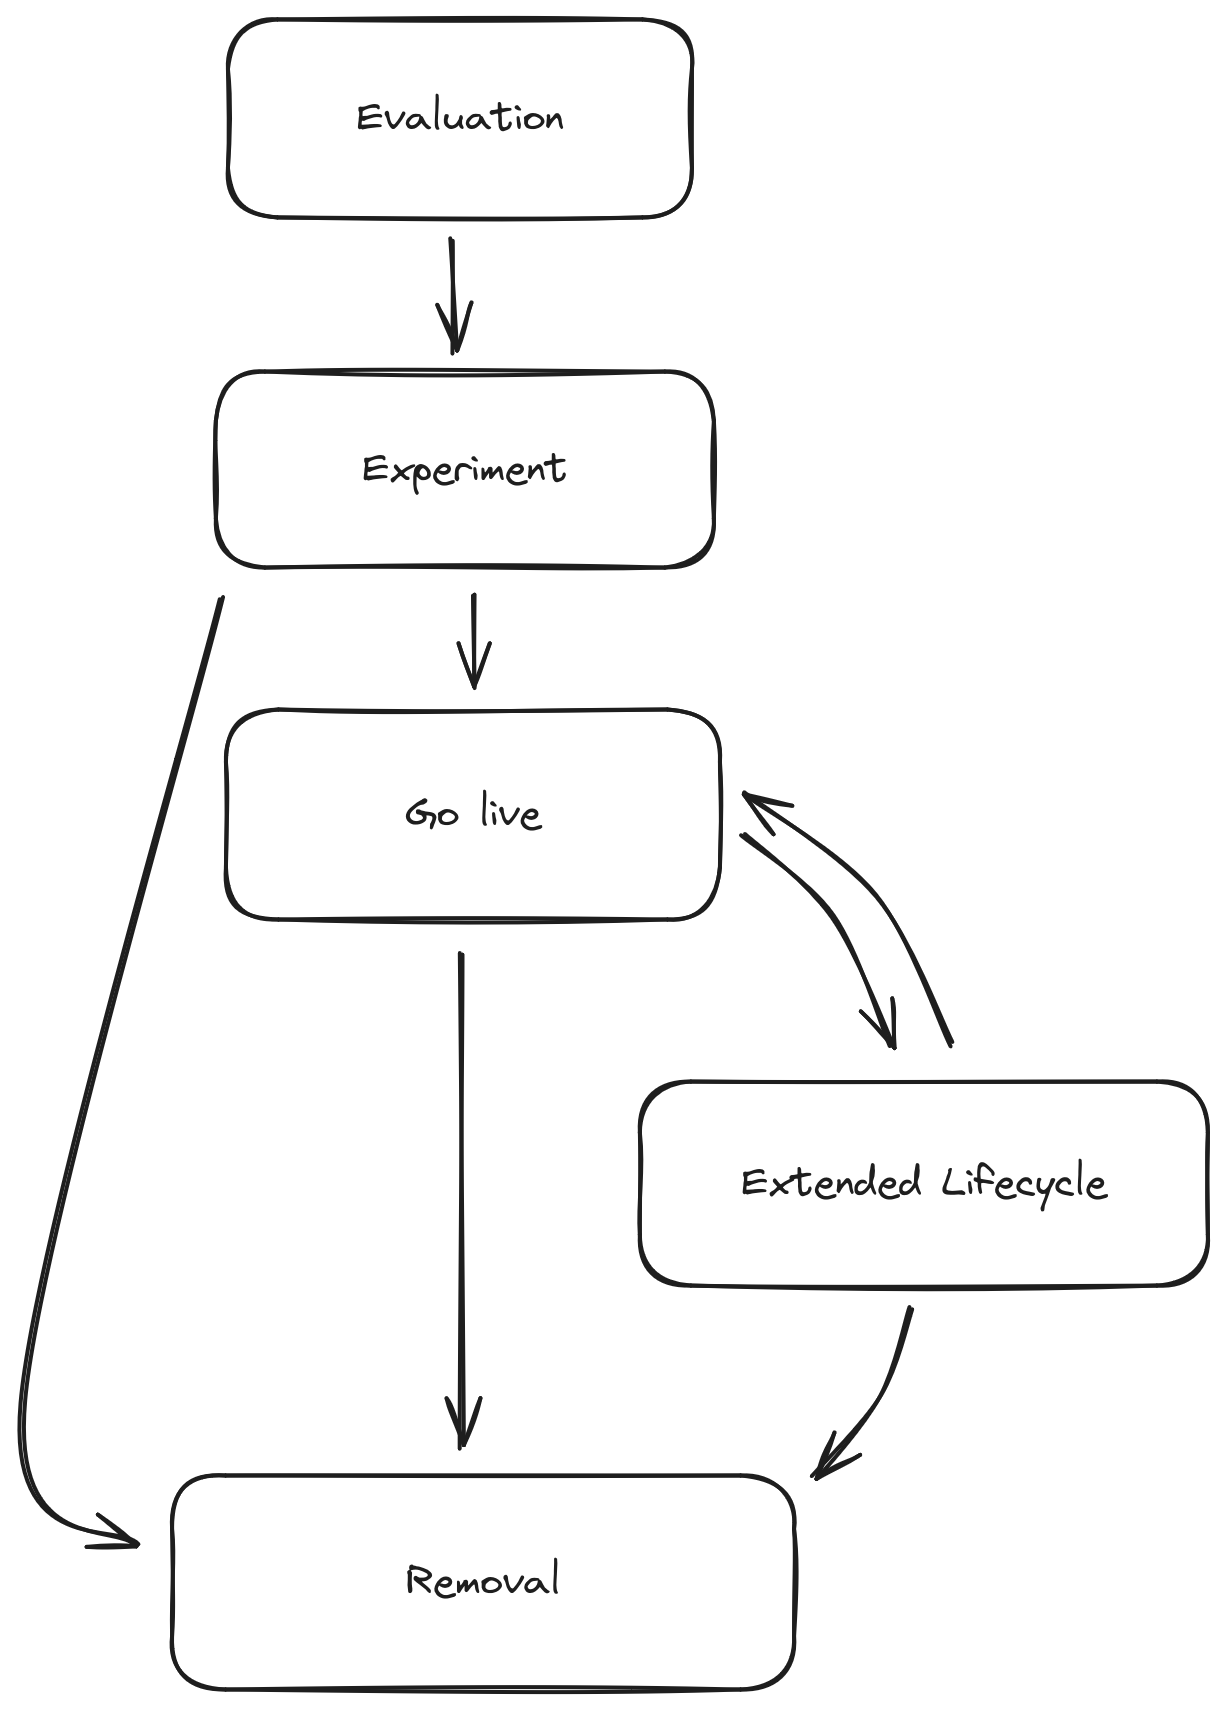 Diagram of the lifecycle layed out below.